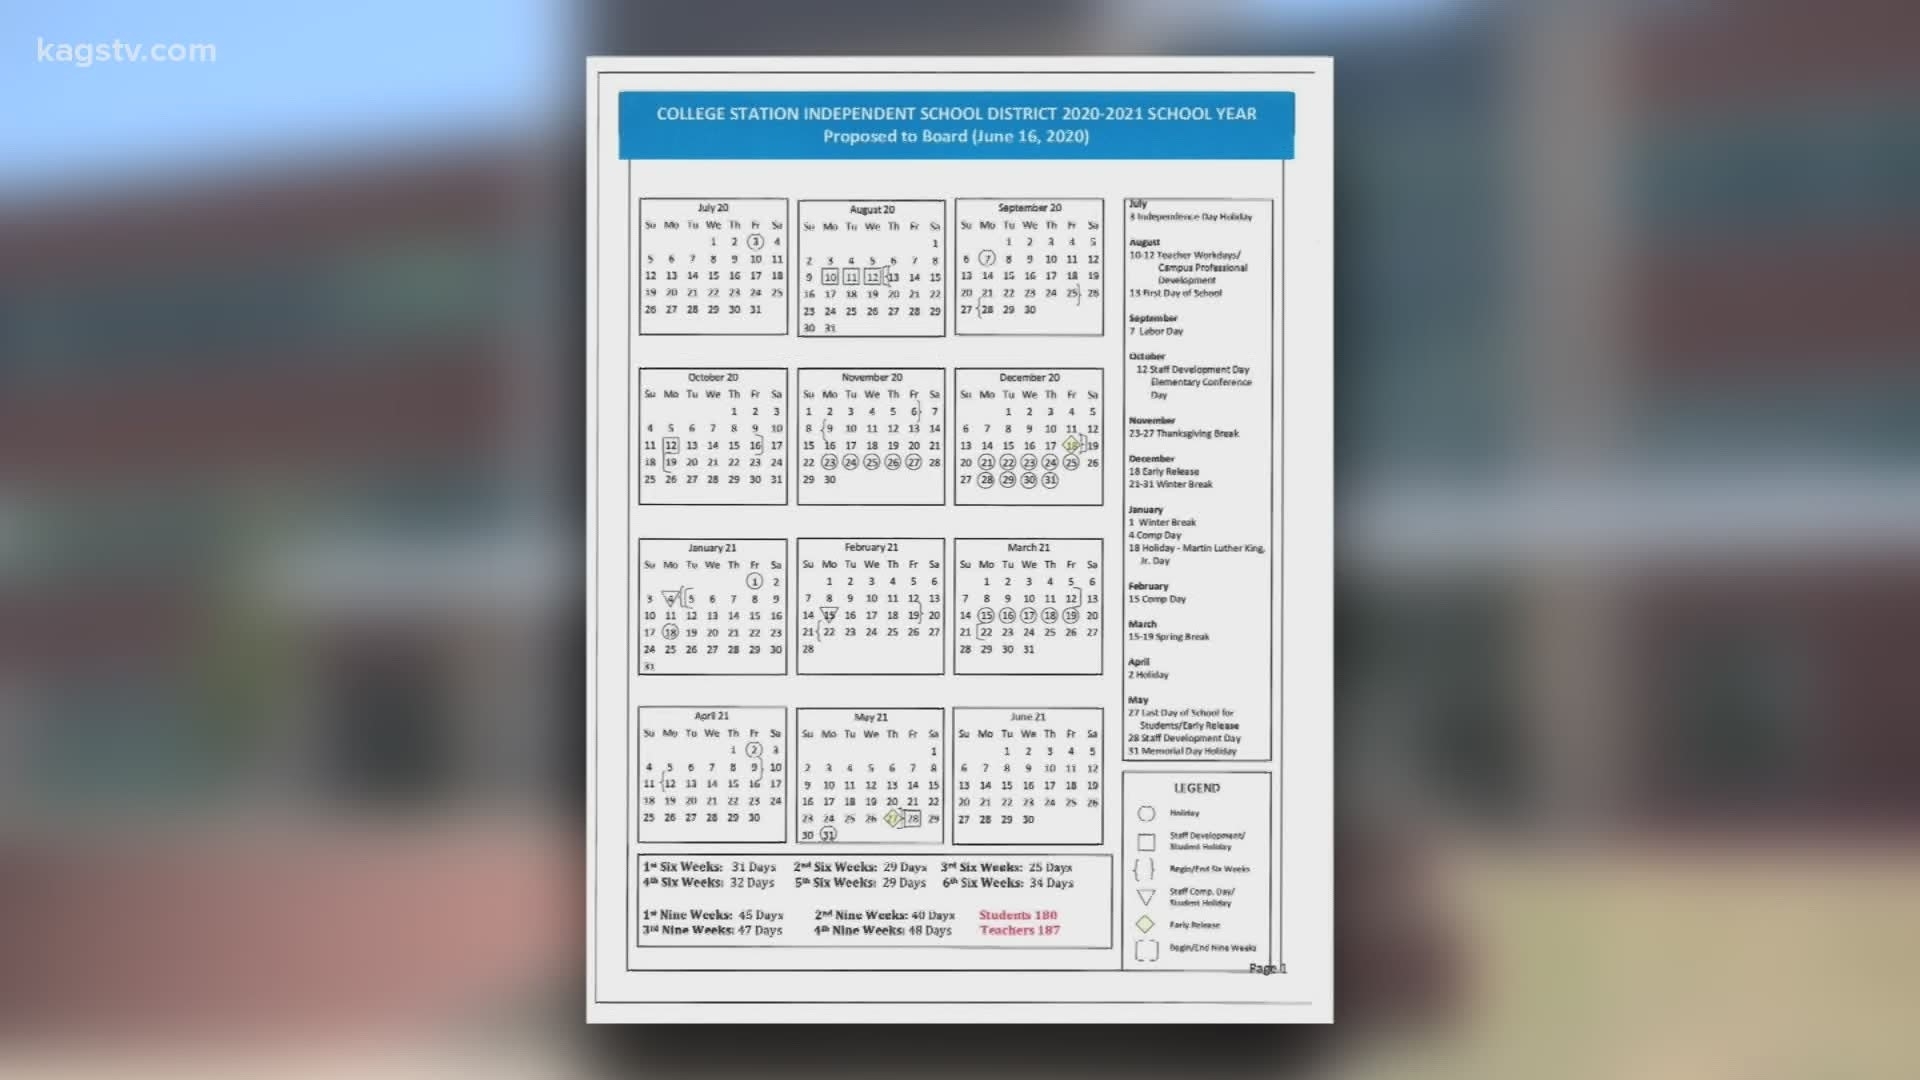 College Station Isd Adds More Days To 2020-2021 Calendar